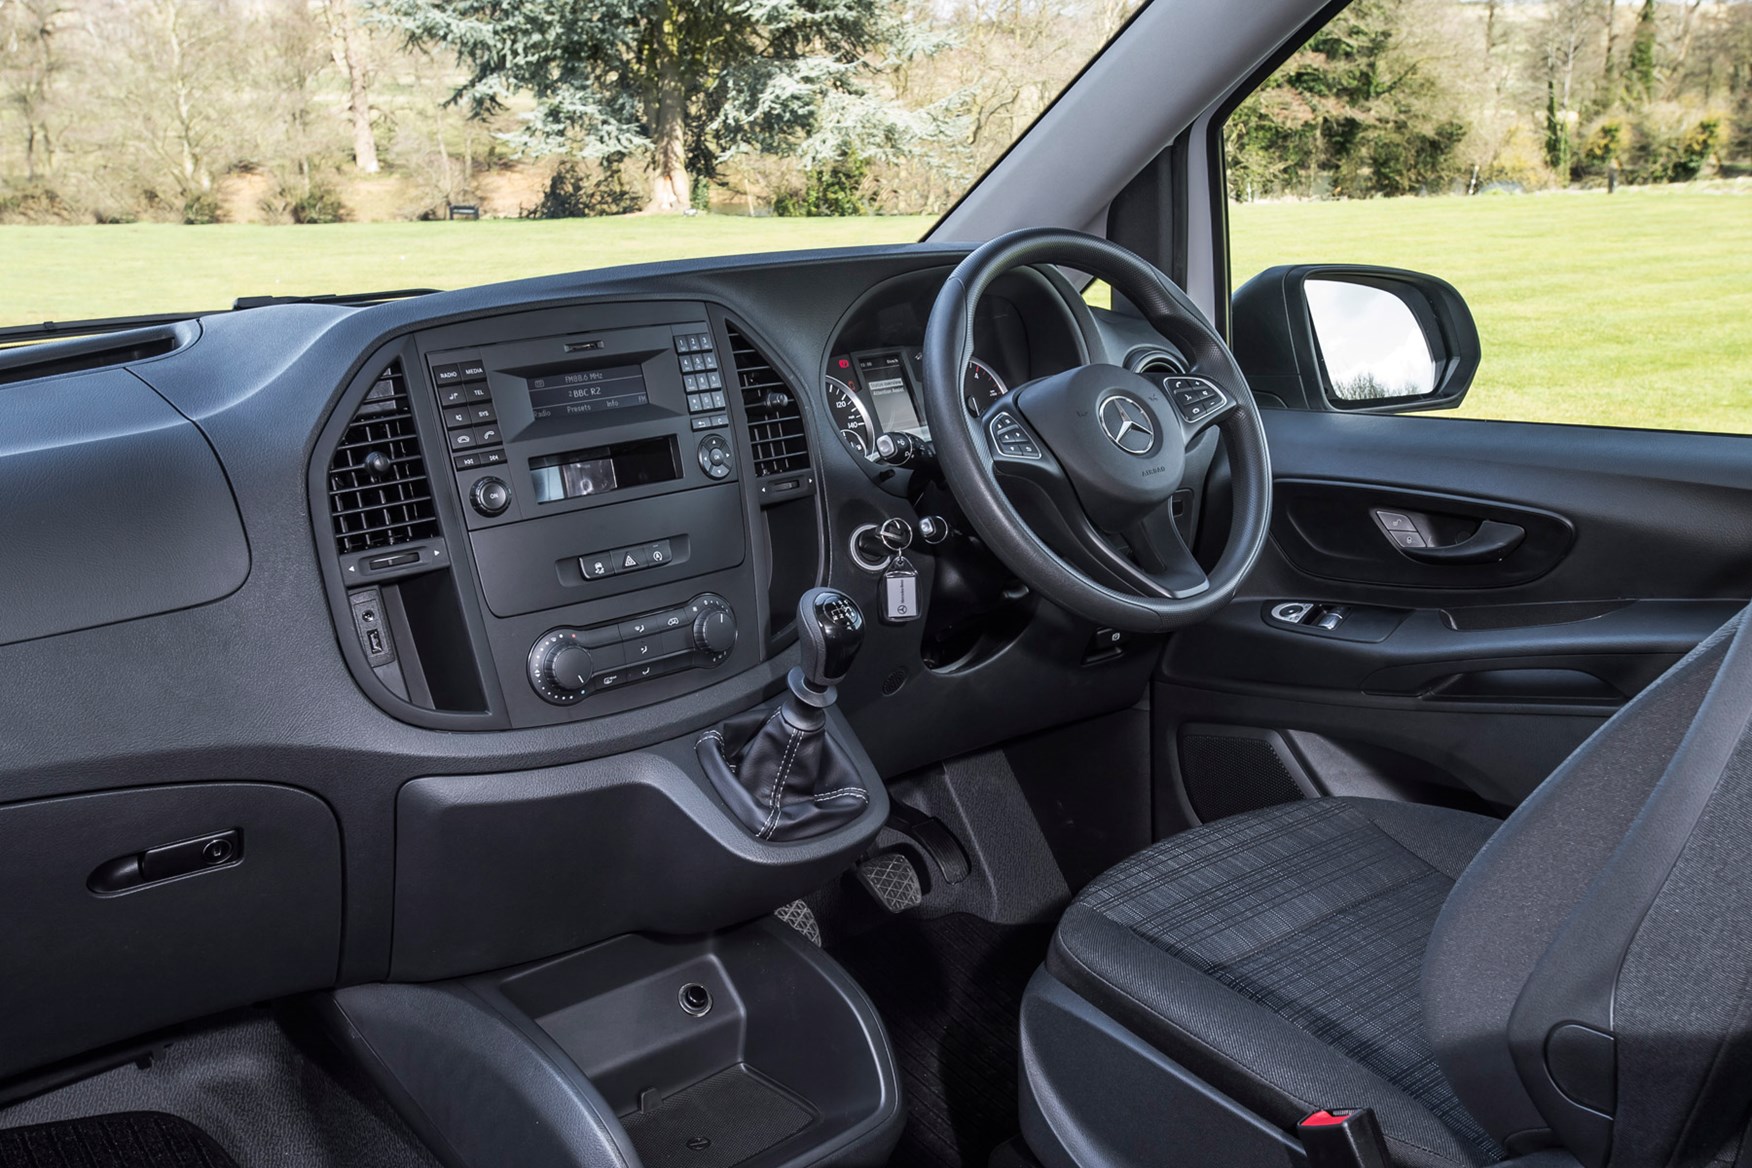 Mercedes-Benz Vito full review on Parkers Vans - cabin interior